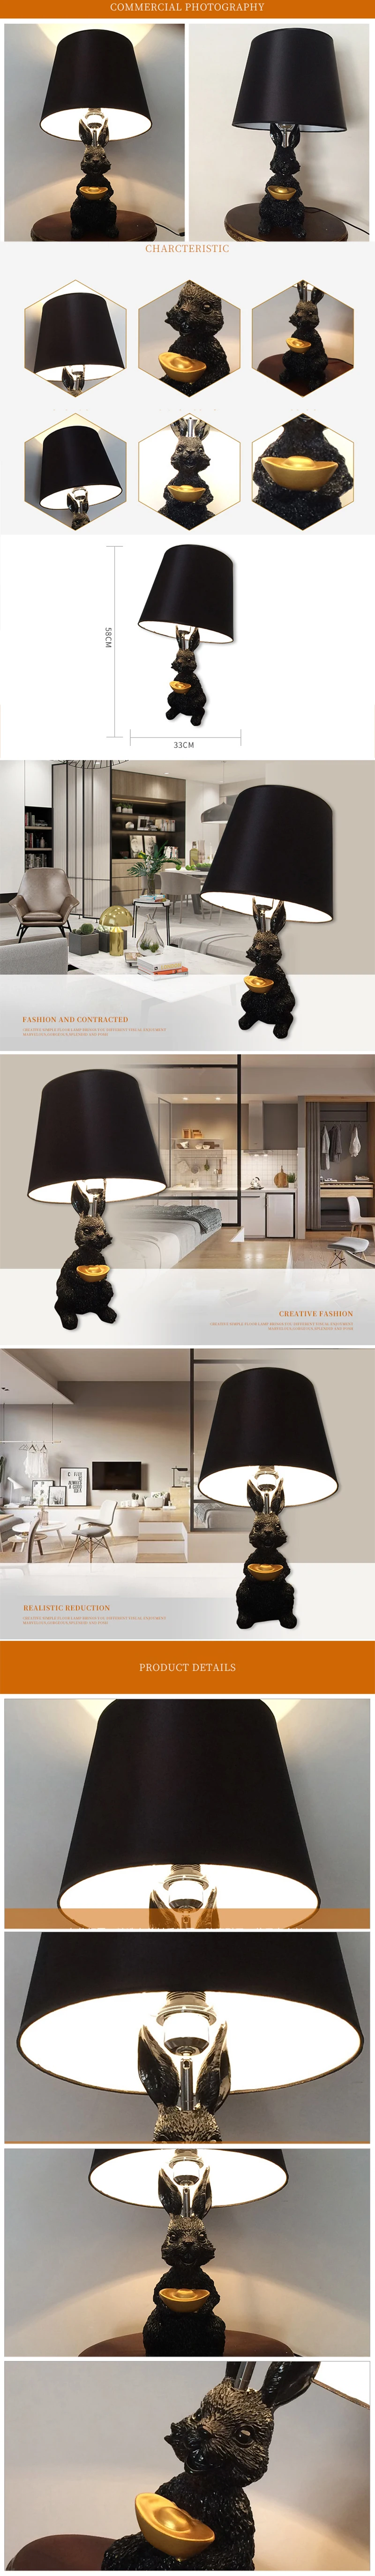 Top sale hotel living room rabbit shape animal resin vintage table lamps for home decor